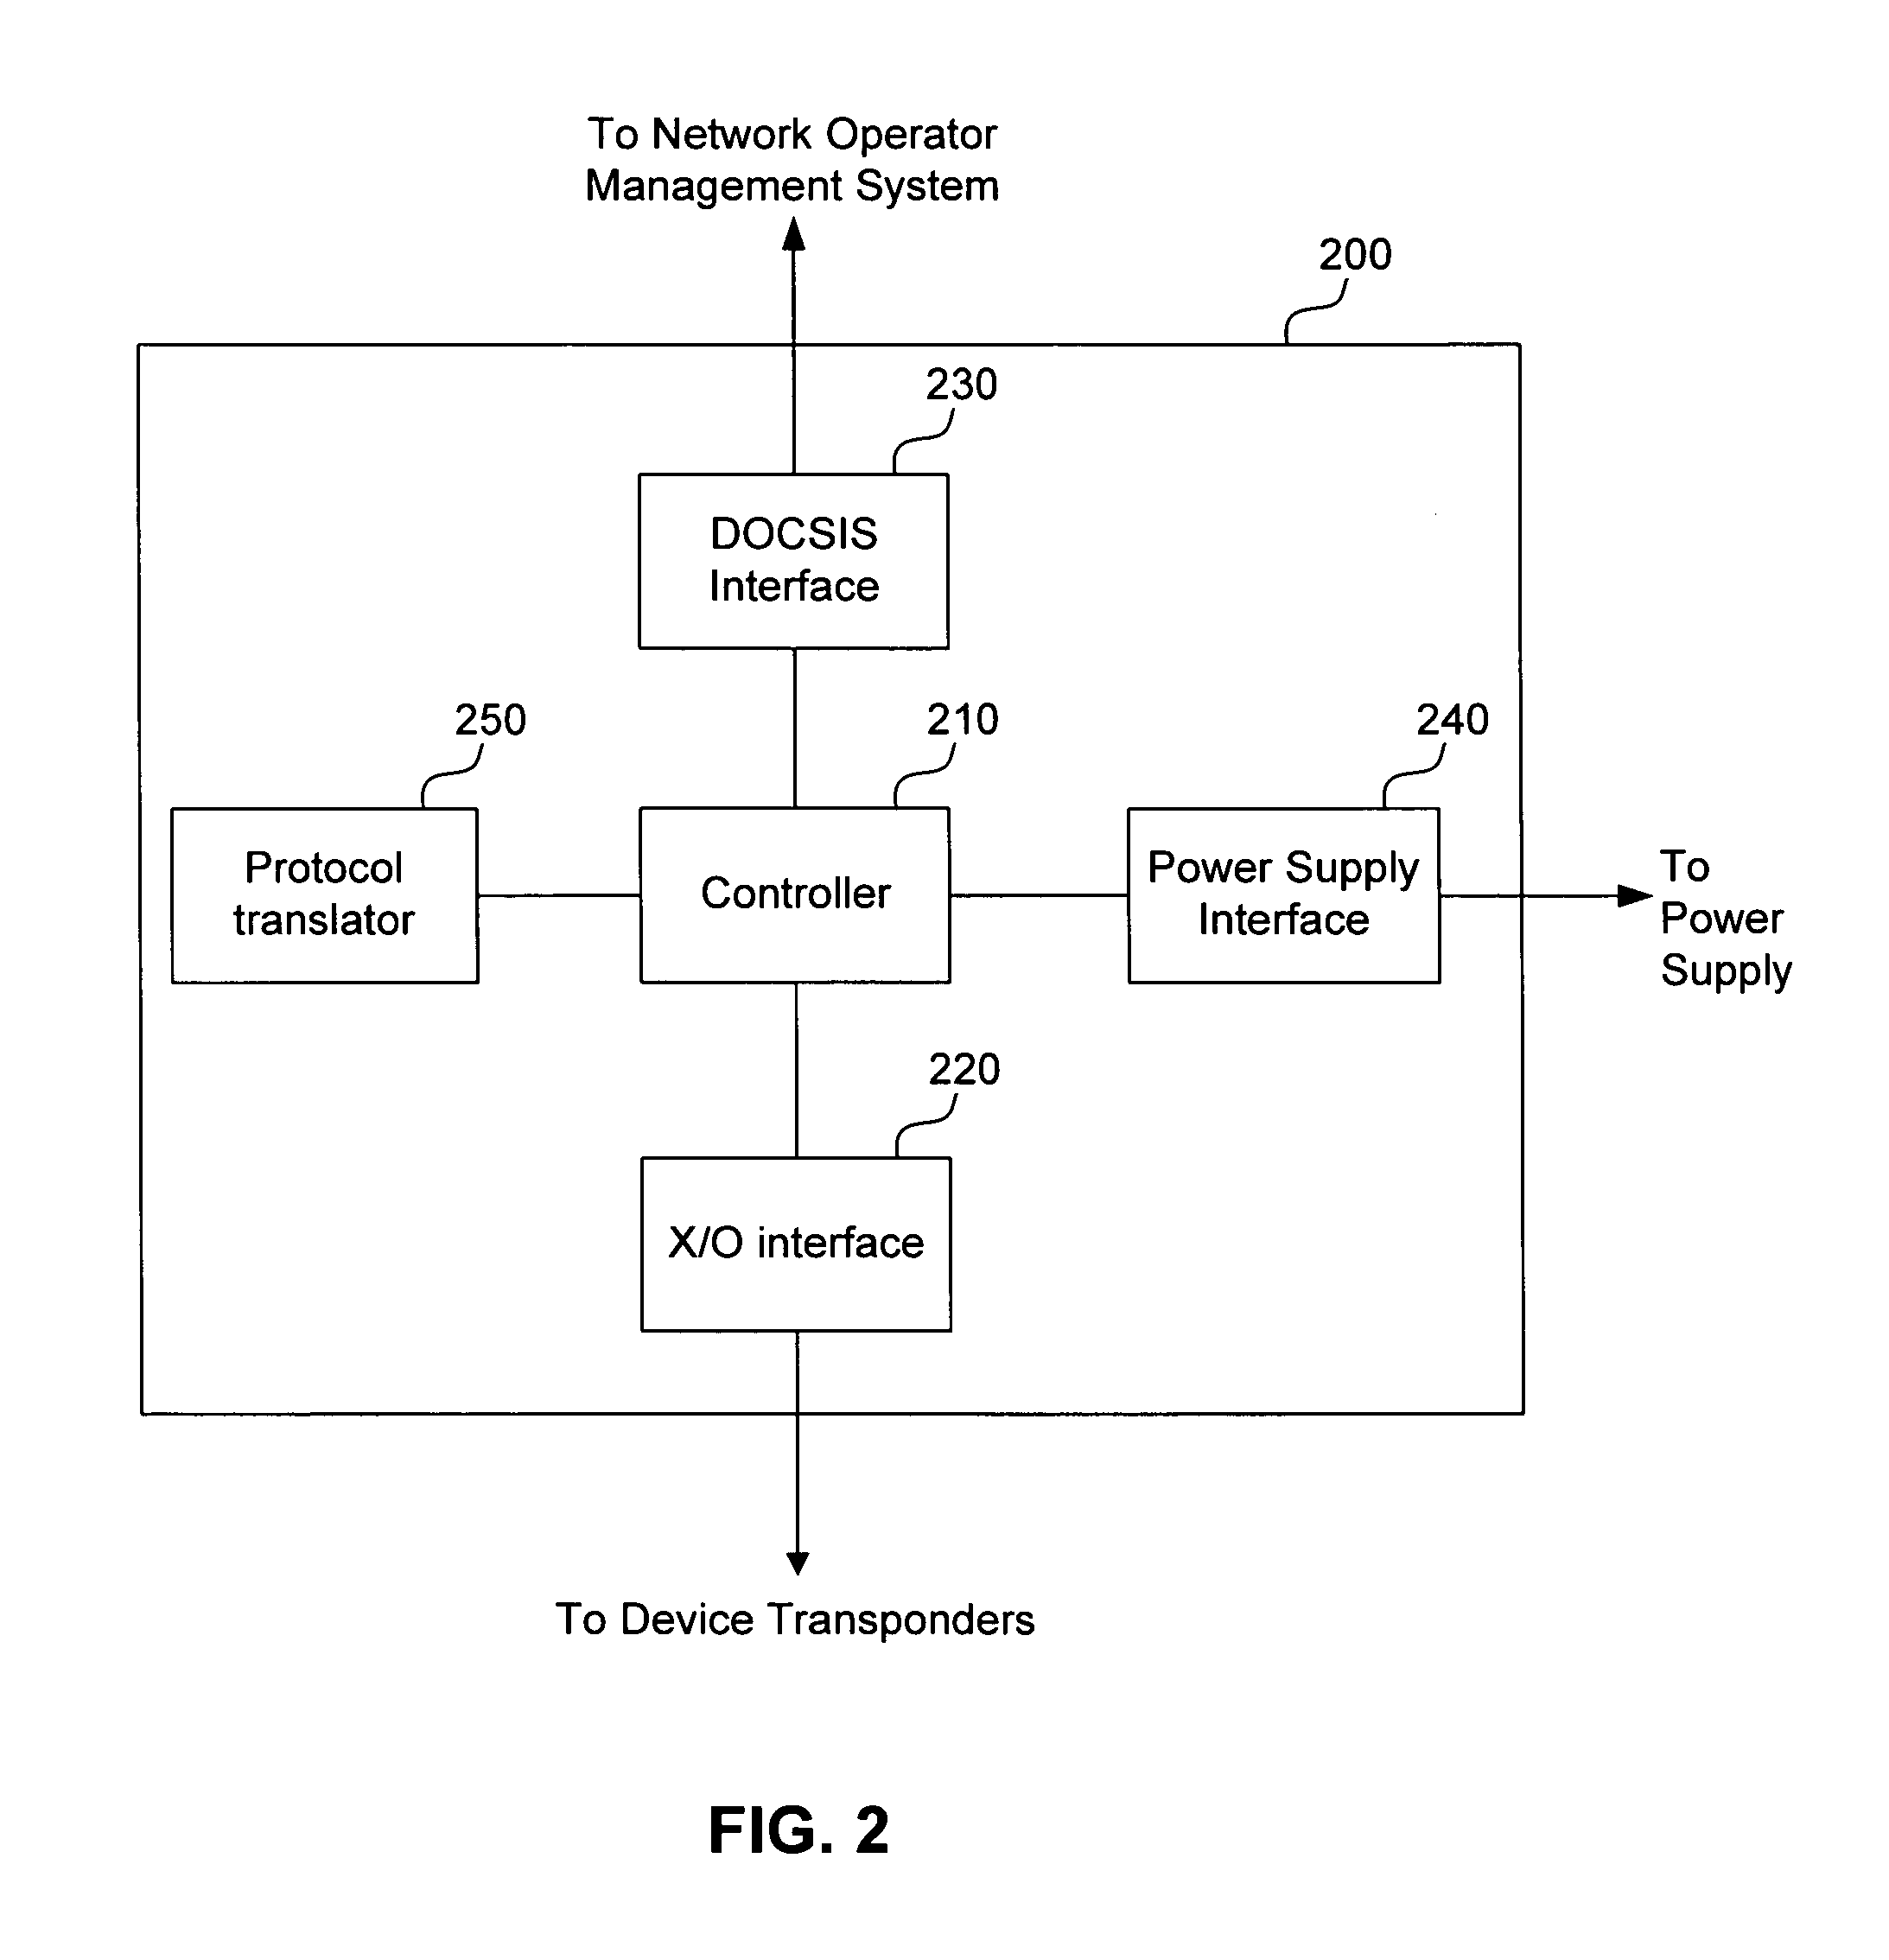 Apparatus, system, and methods for status monitoring and control of cable television network components